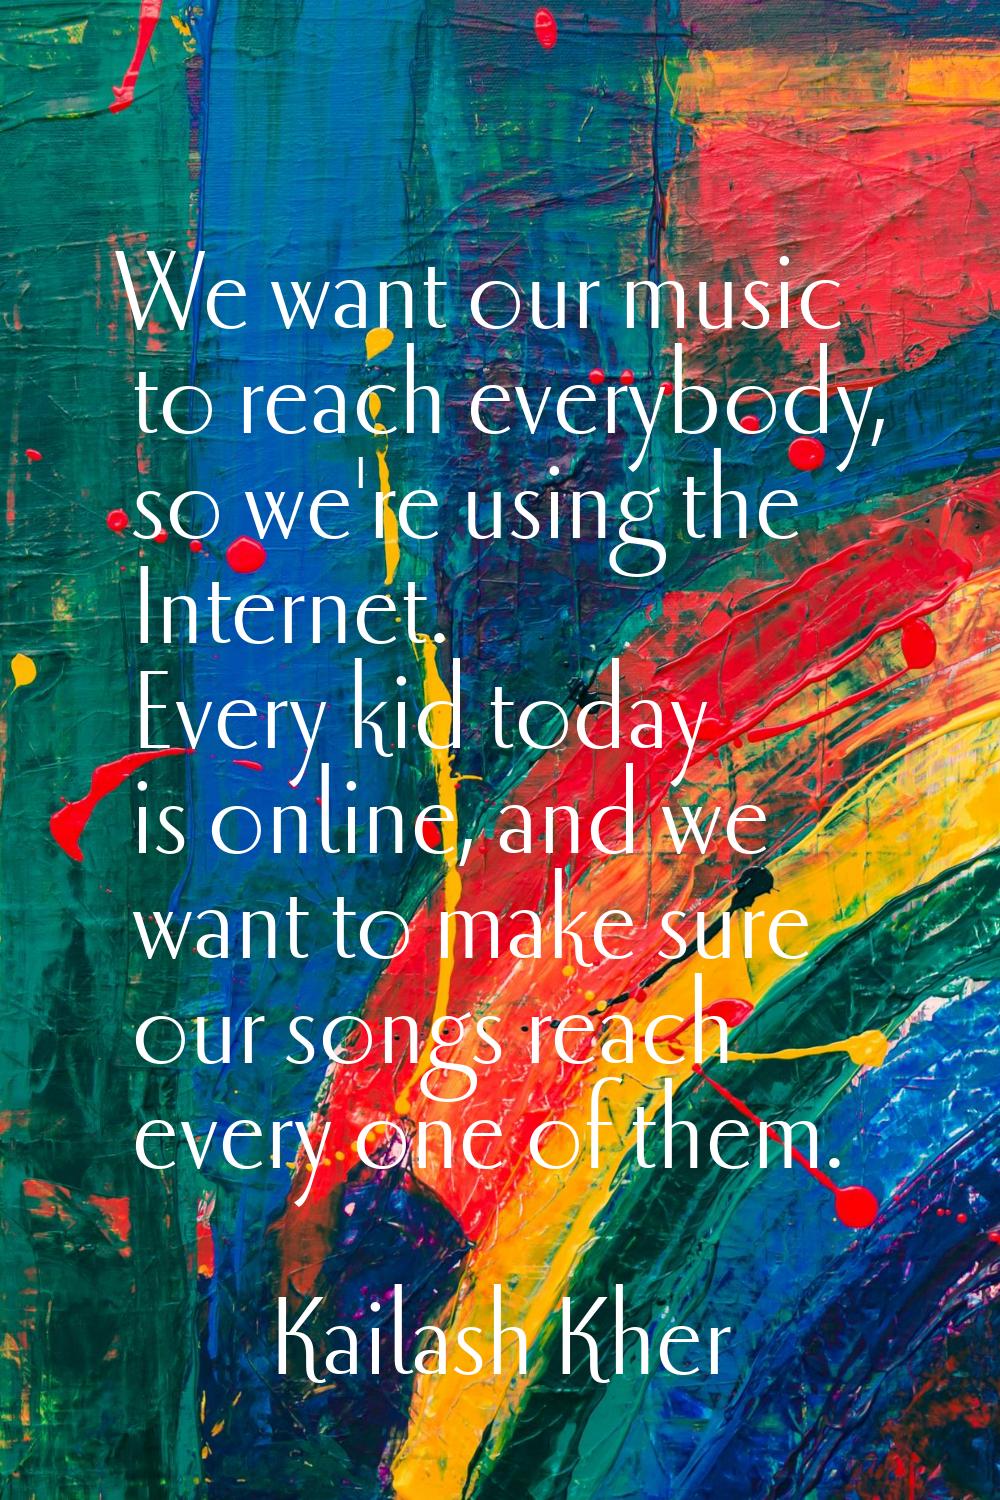 We want our music to reach everybody, so we're using the Internet. Every kid today is online, and w